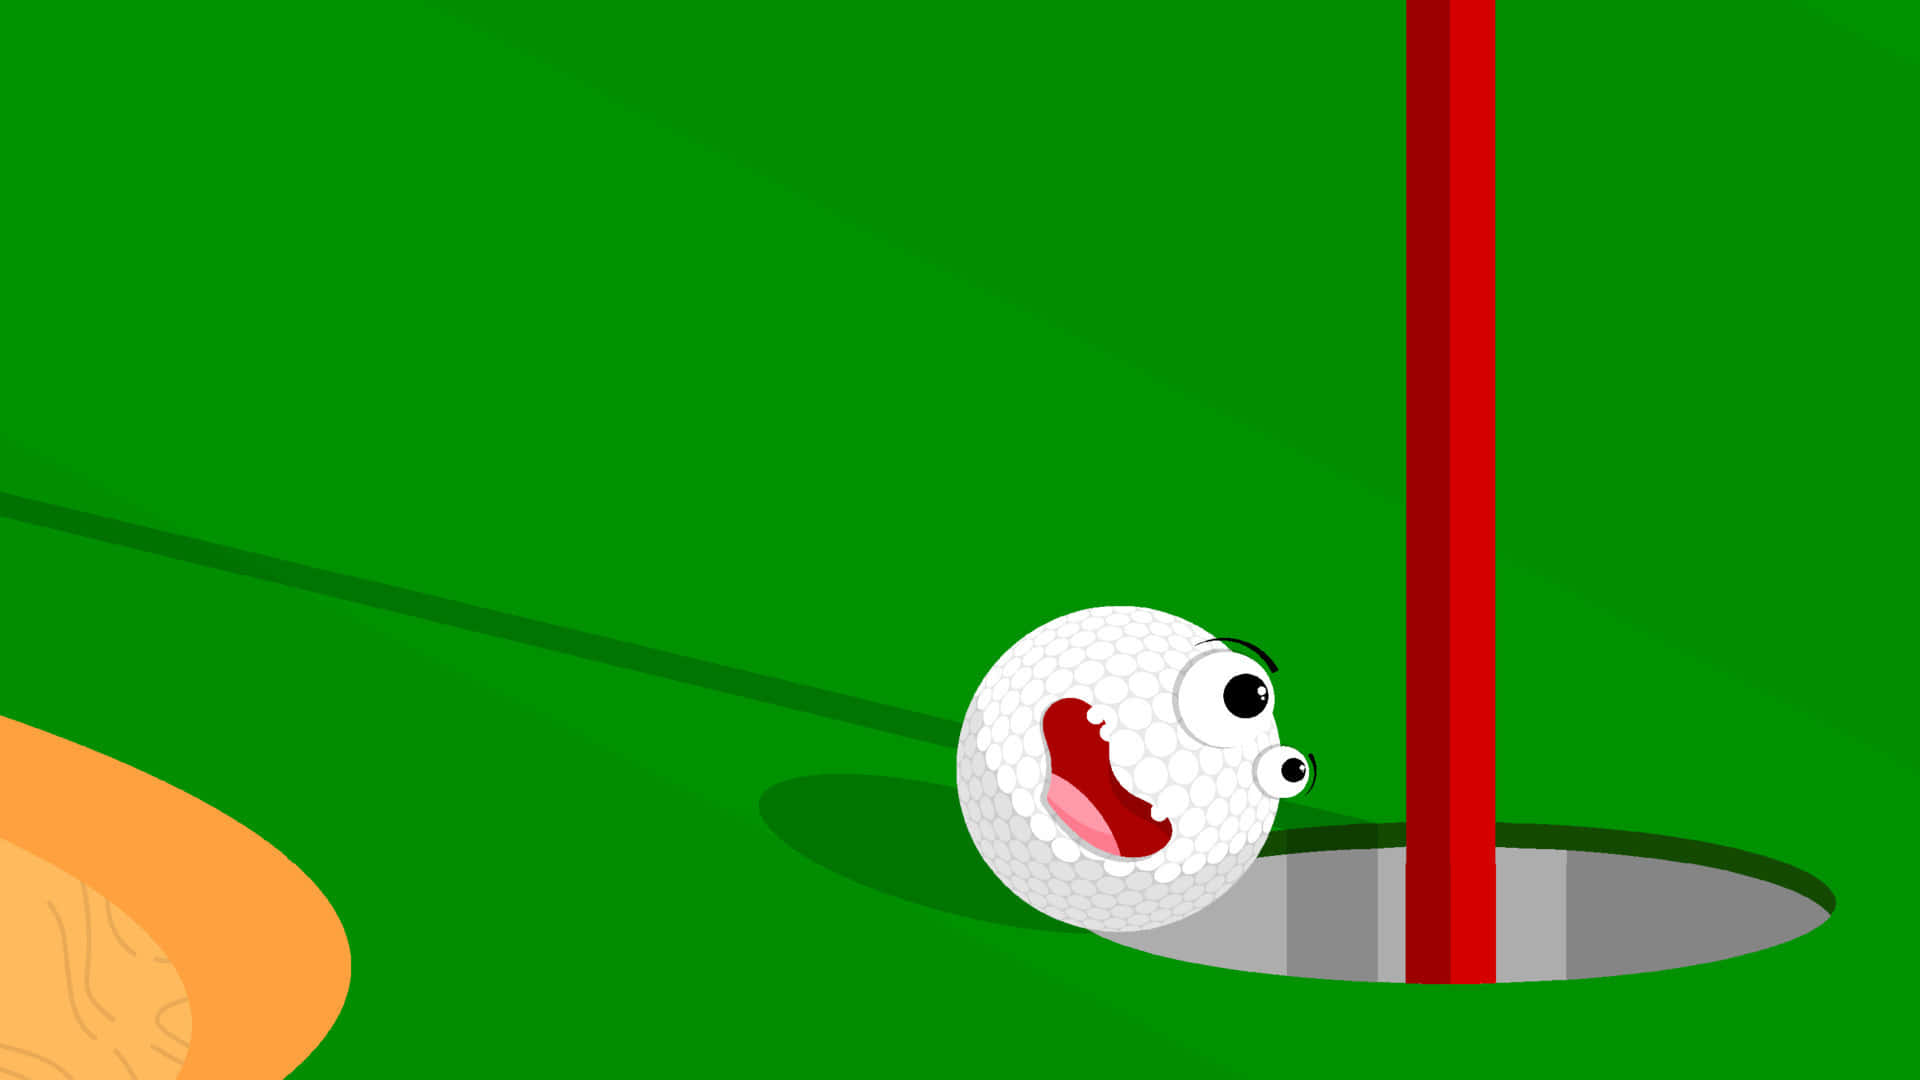 Funny Golf Ball Cartoon Picture